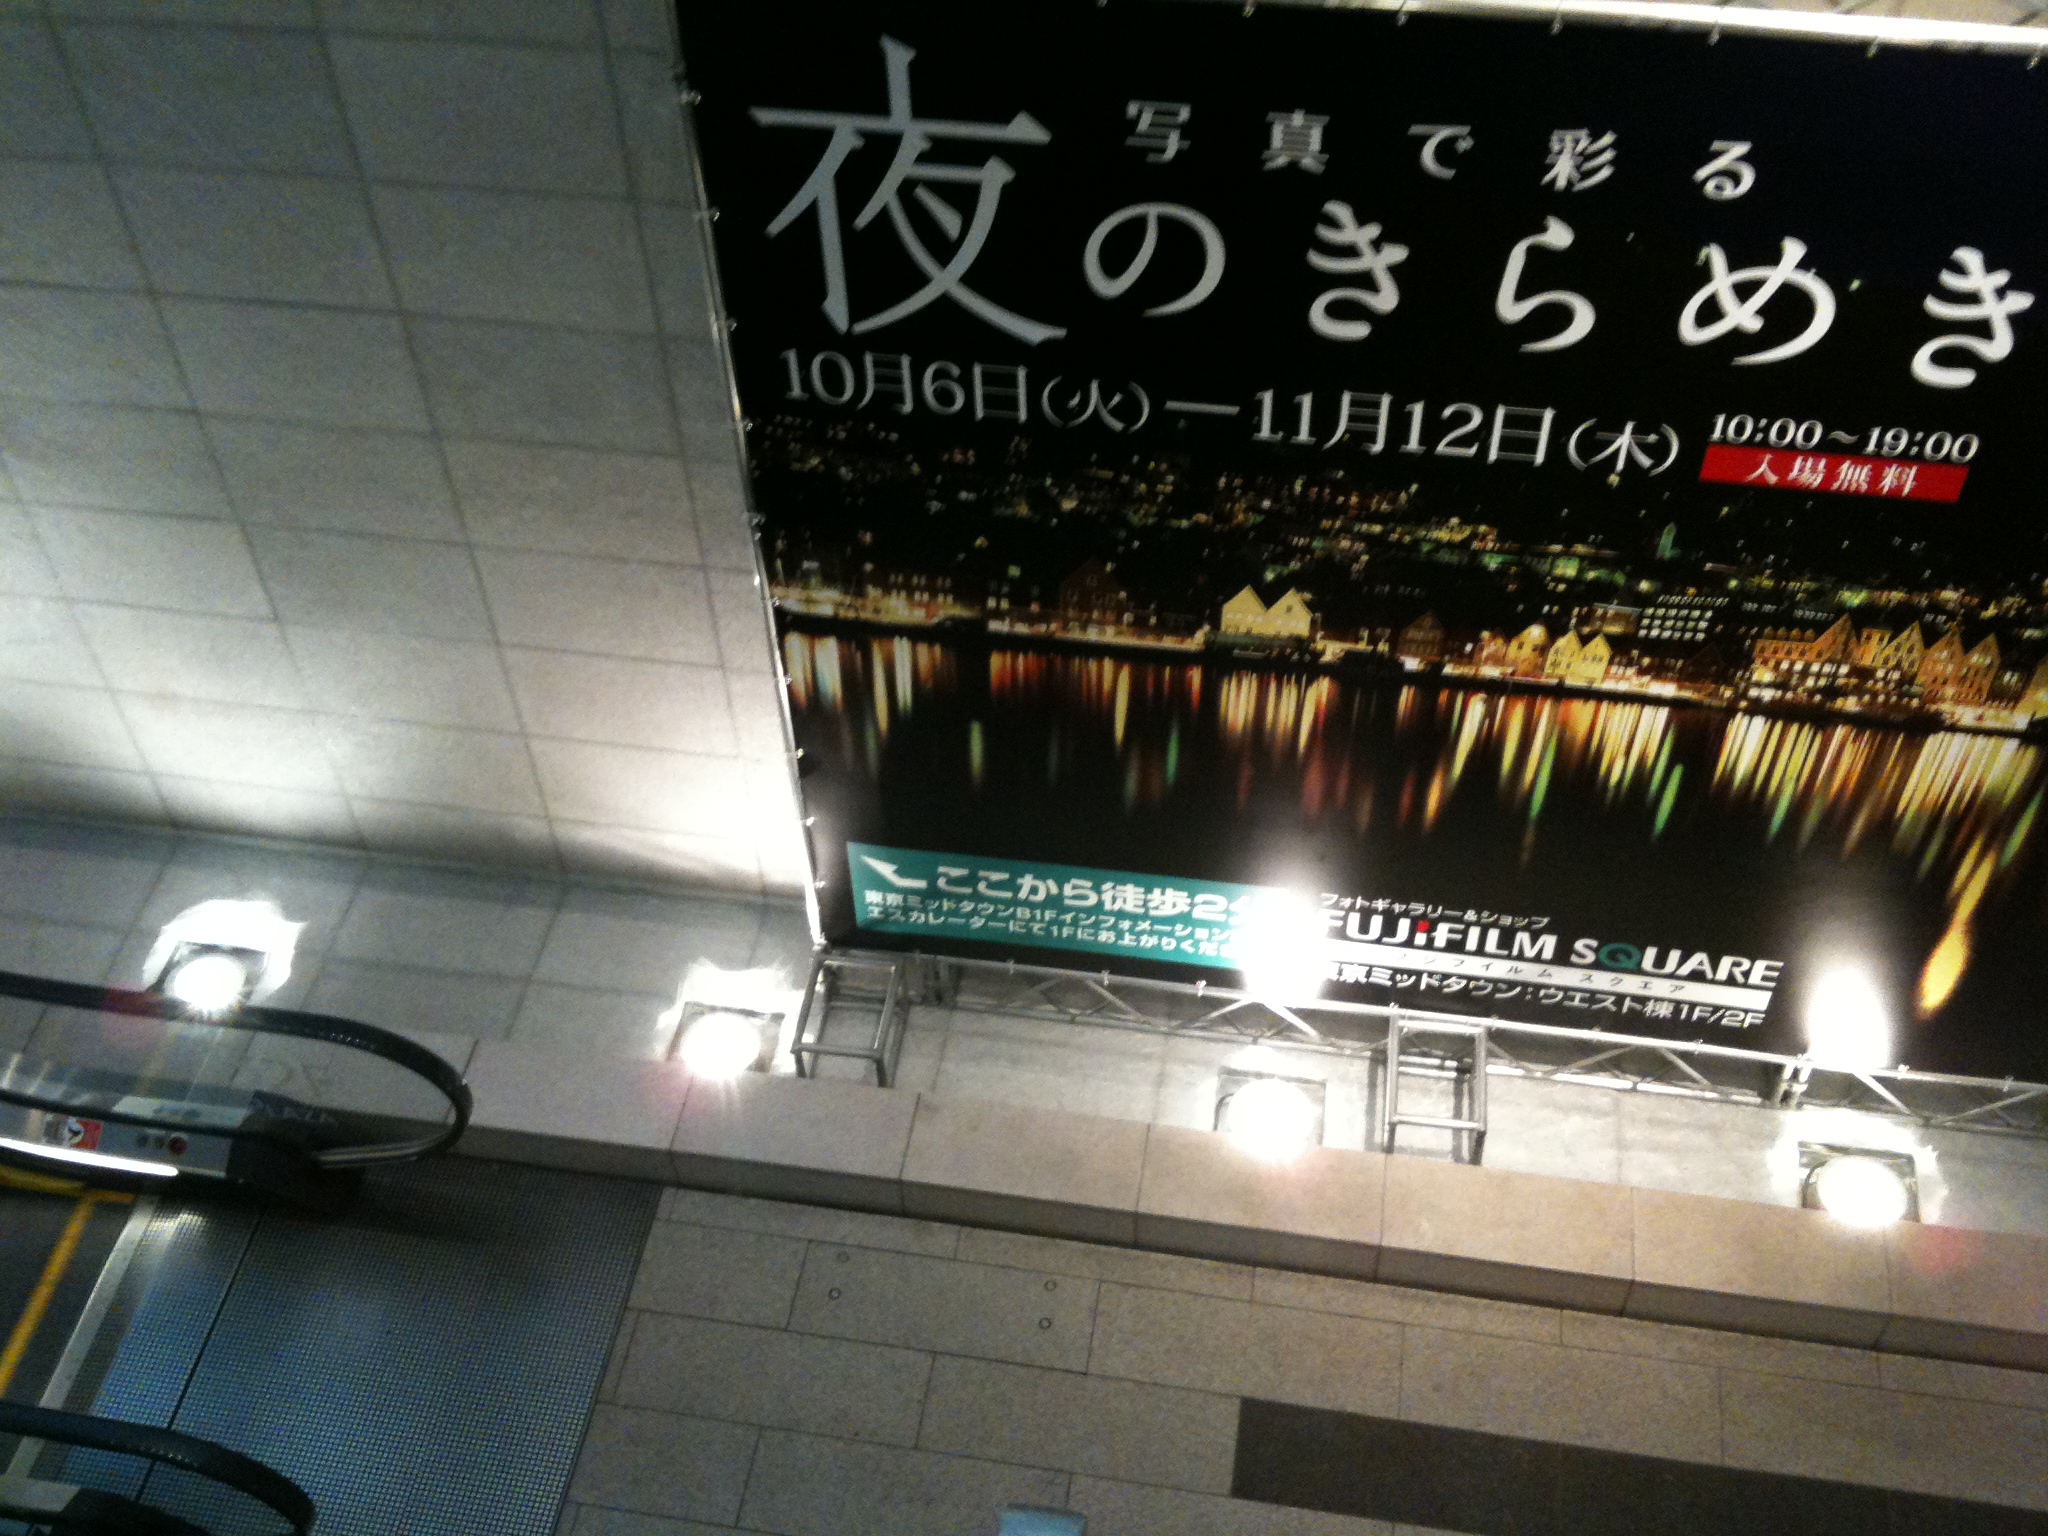 a large advertit hanging from the ceiling inside a station